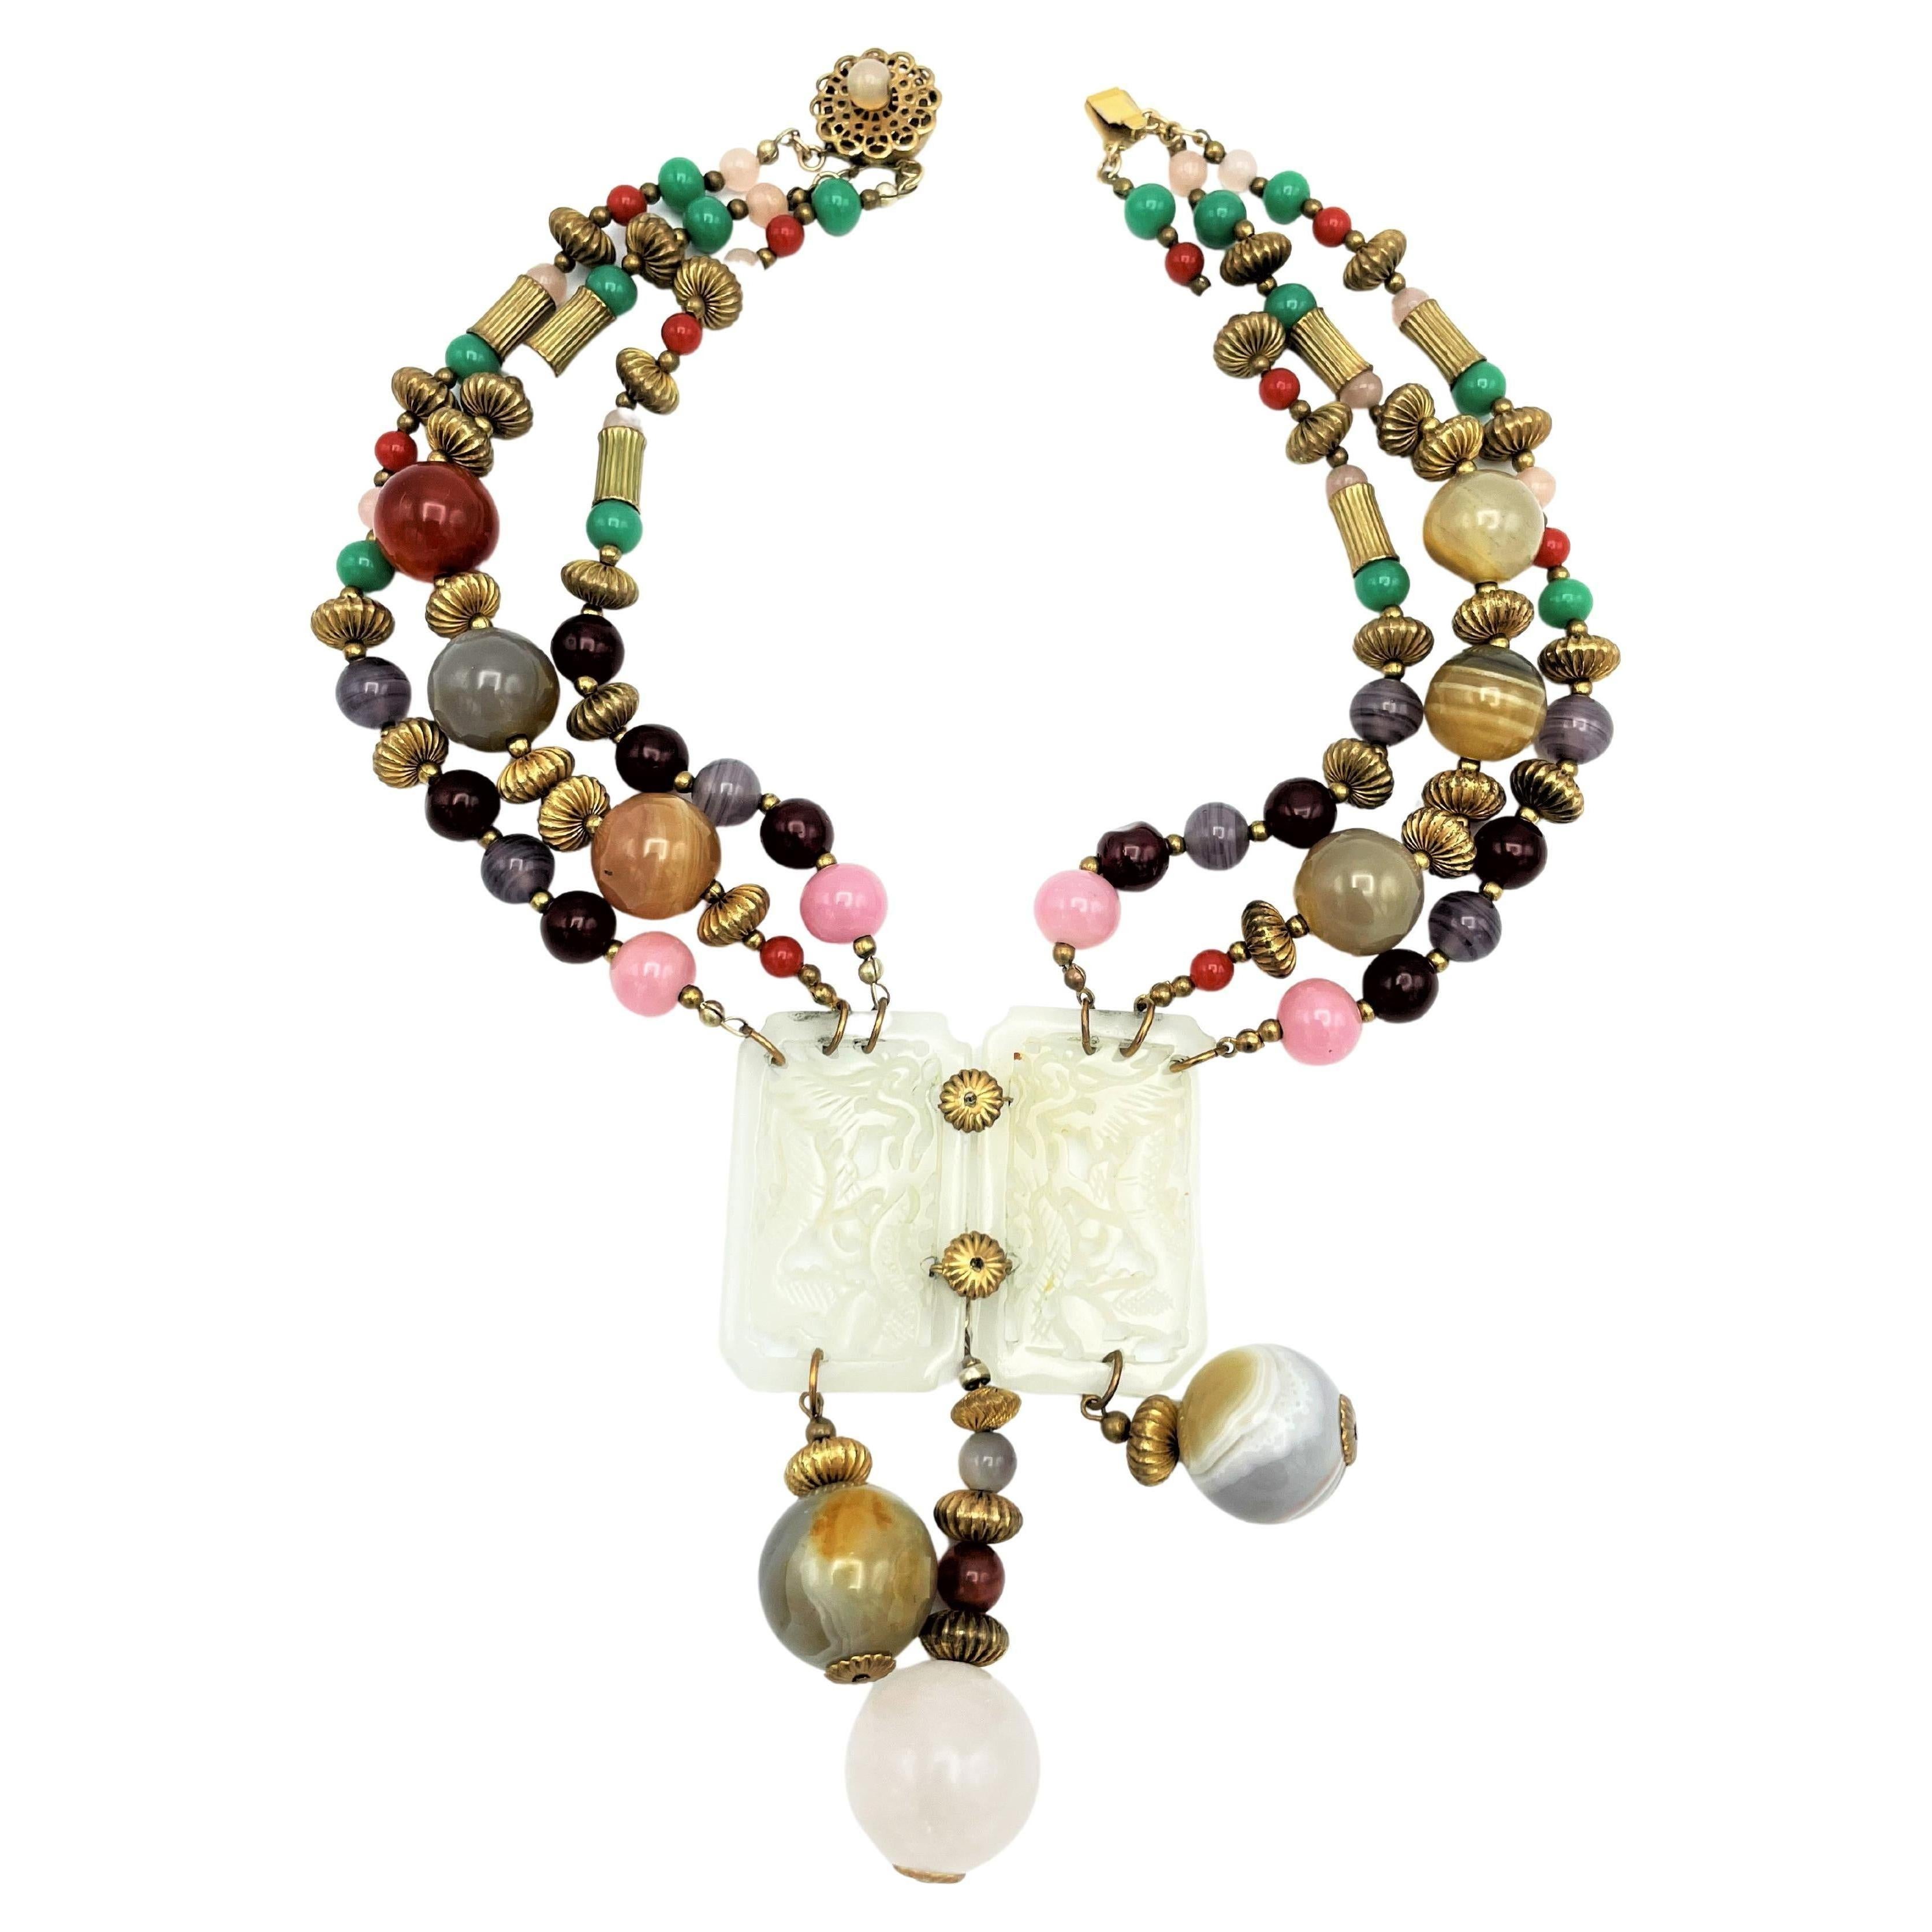 A very interesting necklace by Miriam Haskell from the early 1950s. Consisting of larger and smaller agate balls and smaller glass balls. In the middle there are two 5 x 3 cm carved parts made of jade-like material. 3 large agate balls hanging from